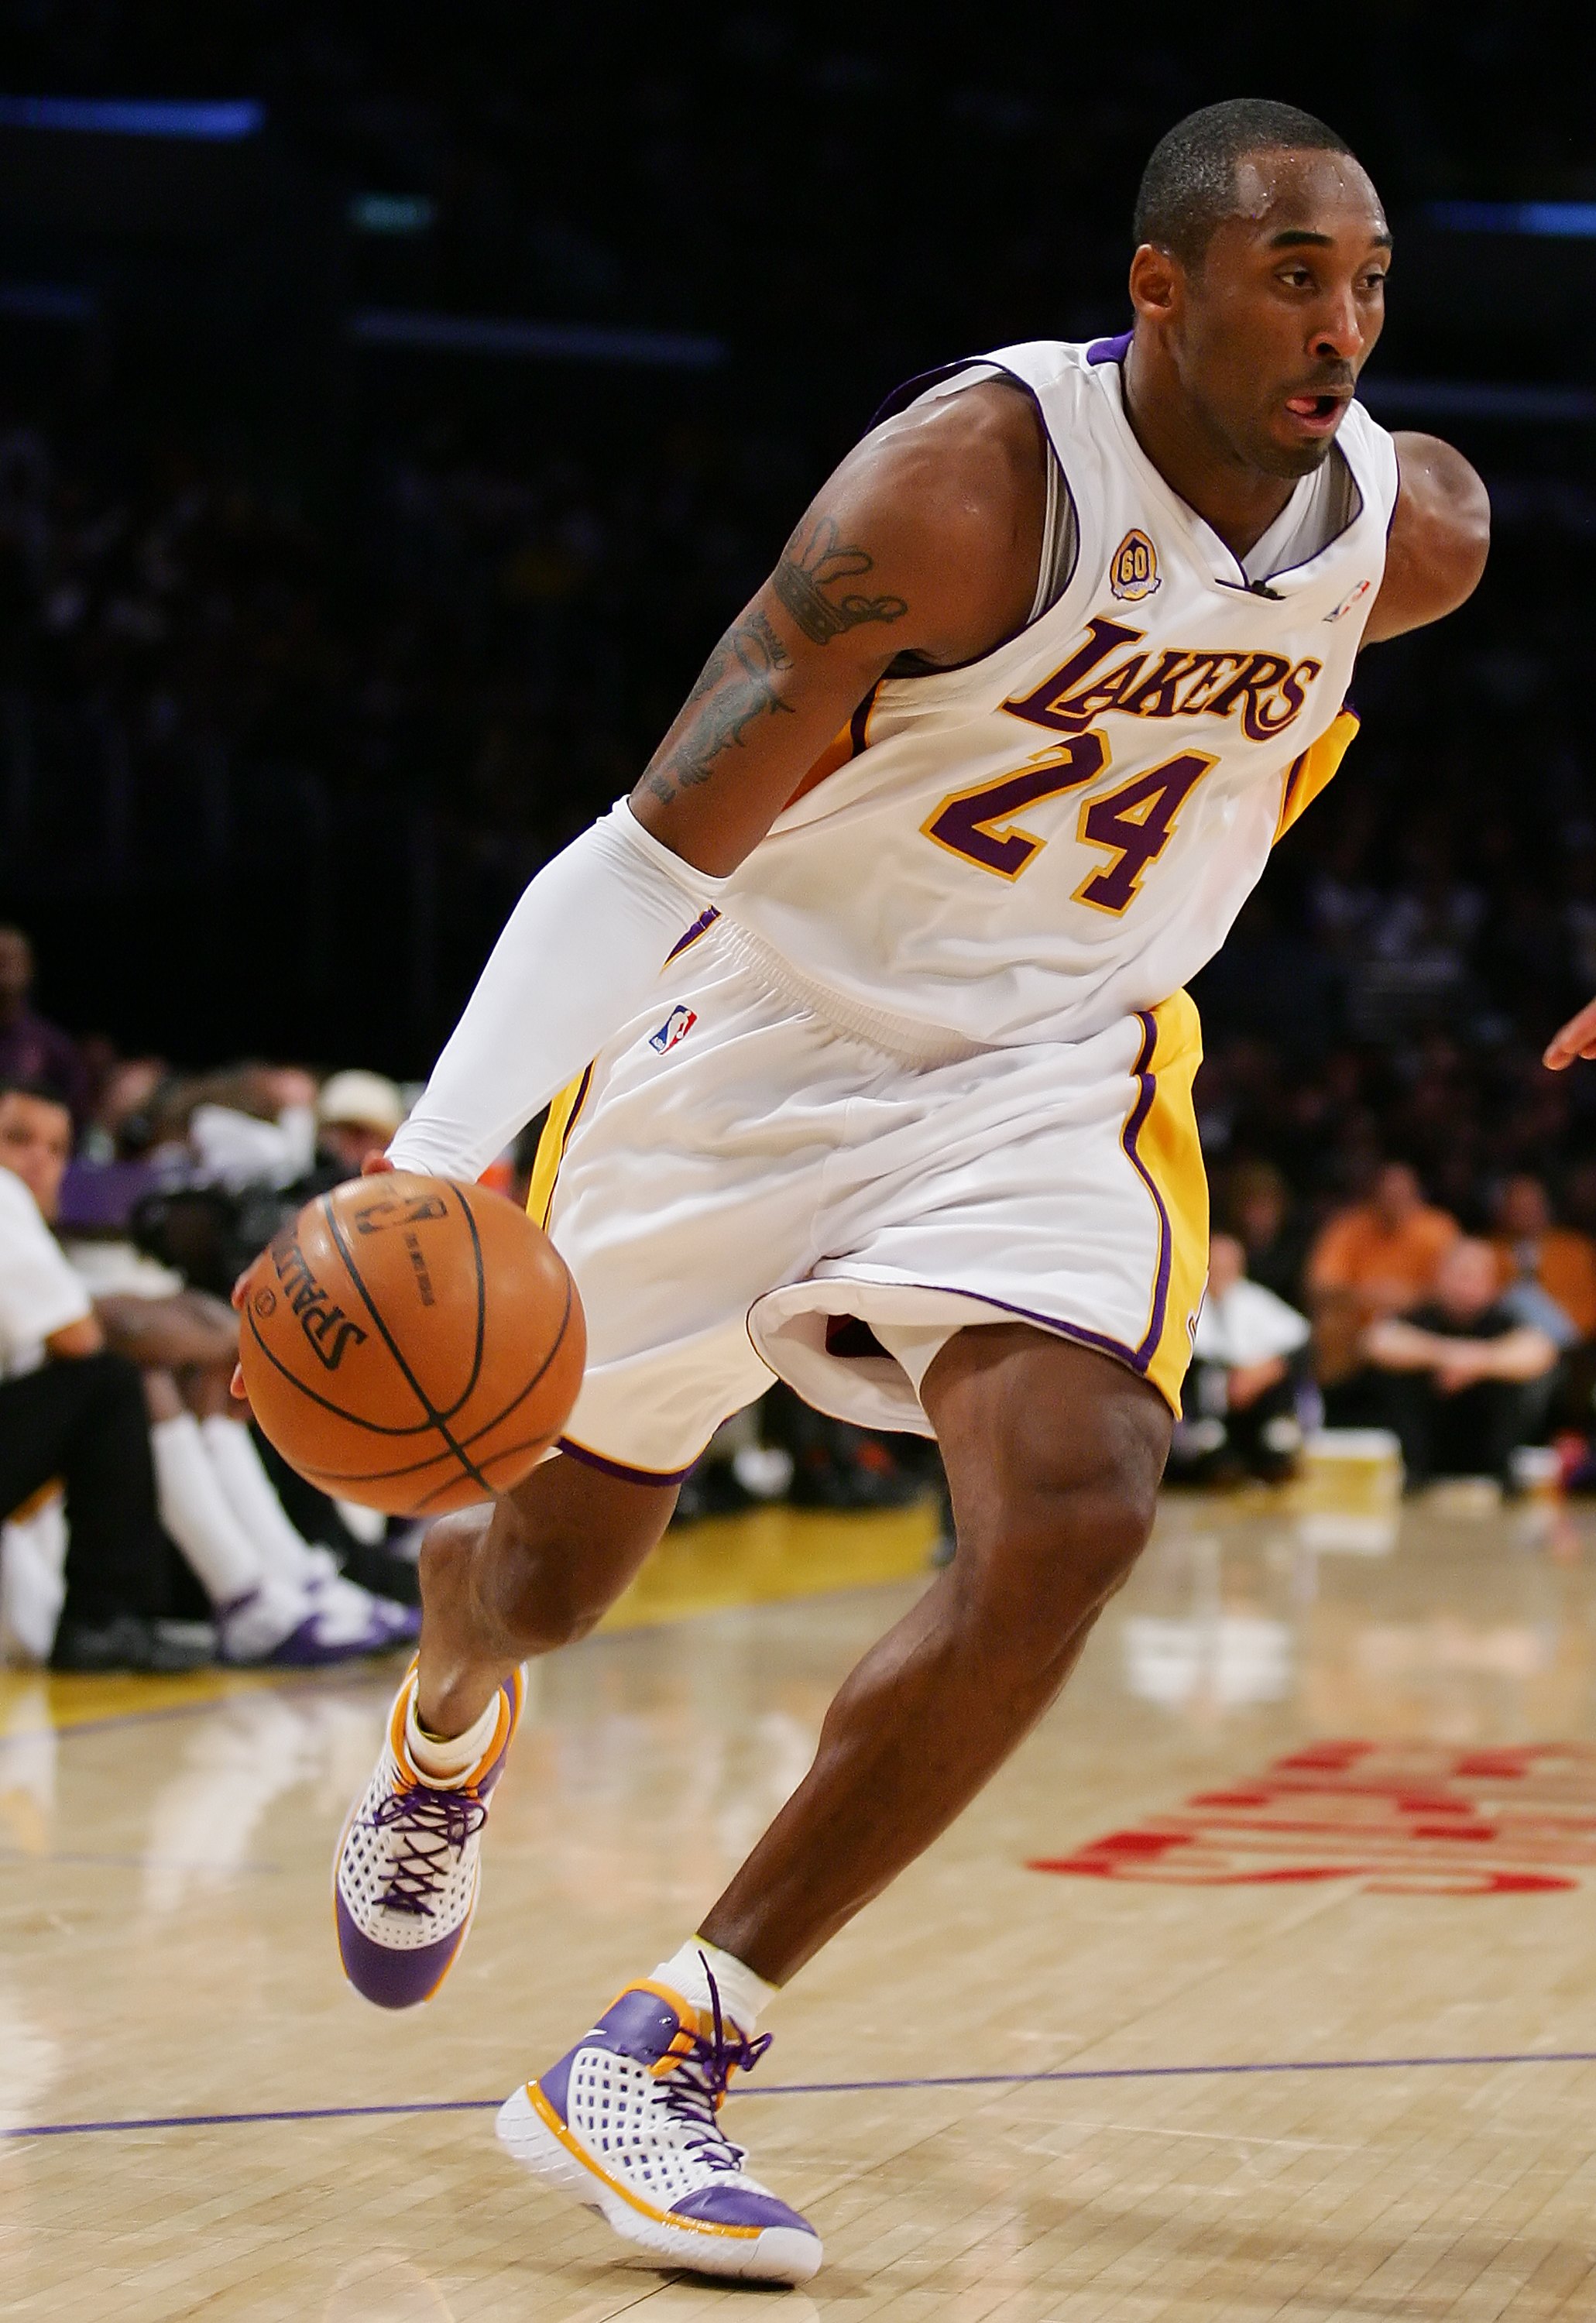 LOS ANGELES, CA - DECEMBER 25:   Kobe Bryant #24 of the Los Angeles Lakers drives to the basket during the game against the Phoenix Suns at Staples Center on December 25, 2007 in Los Angeles, California.  NOTE TO USER: User expressly acknowledges and agre